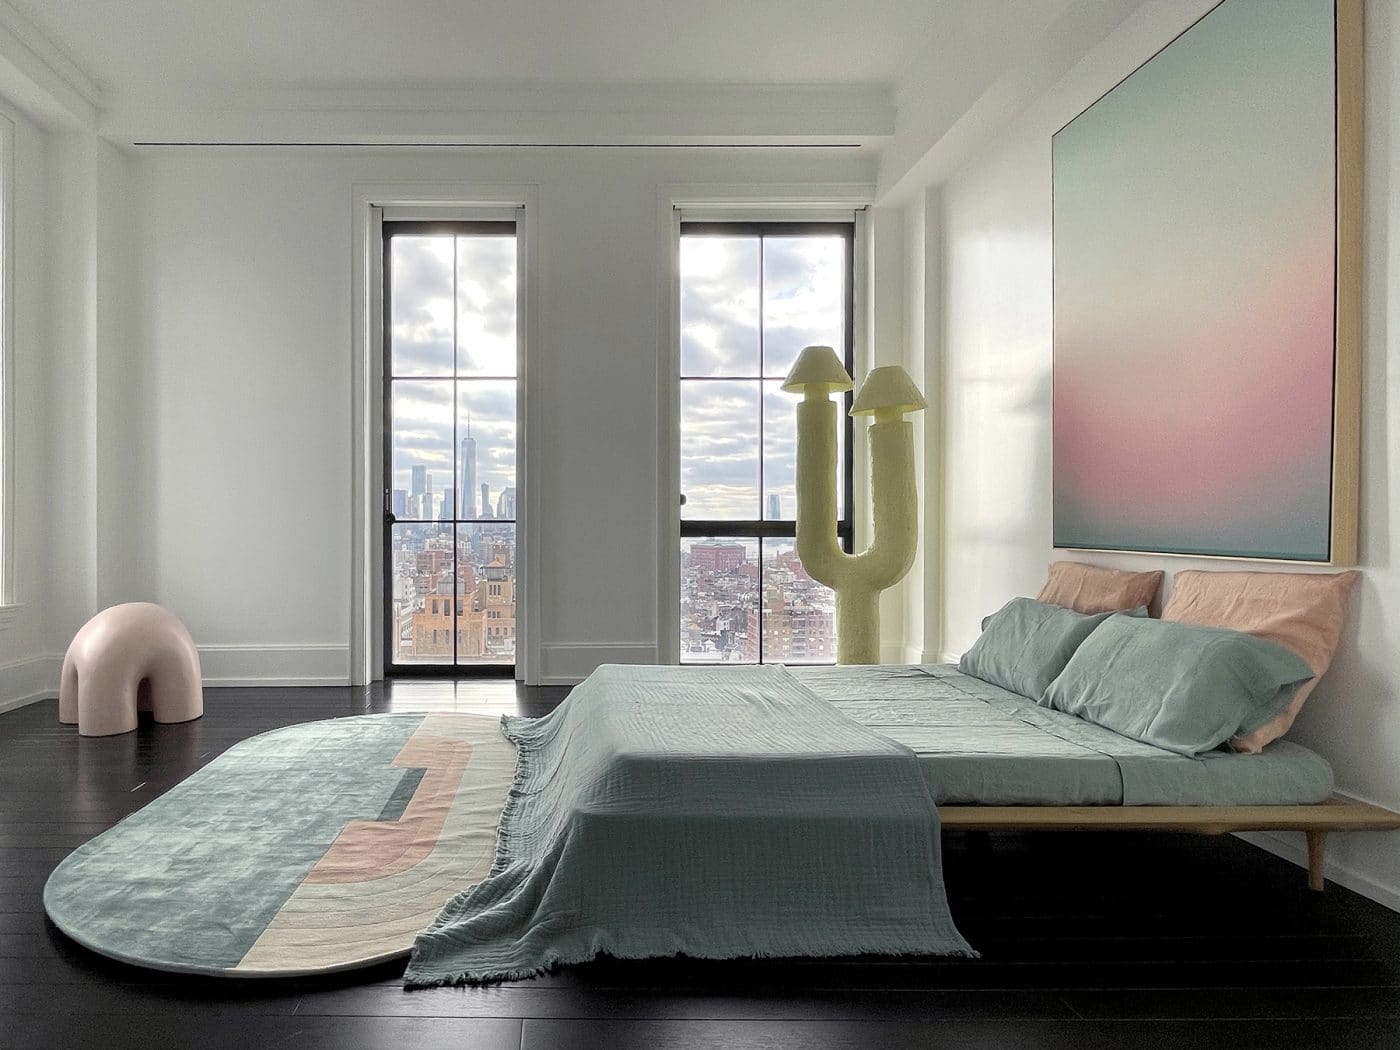 One of the bedrooms in Galerie Philia's staged apartment in New York's Walker Tower